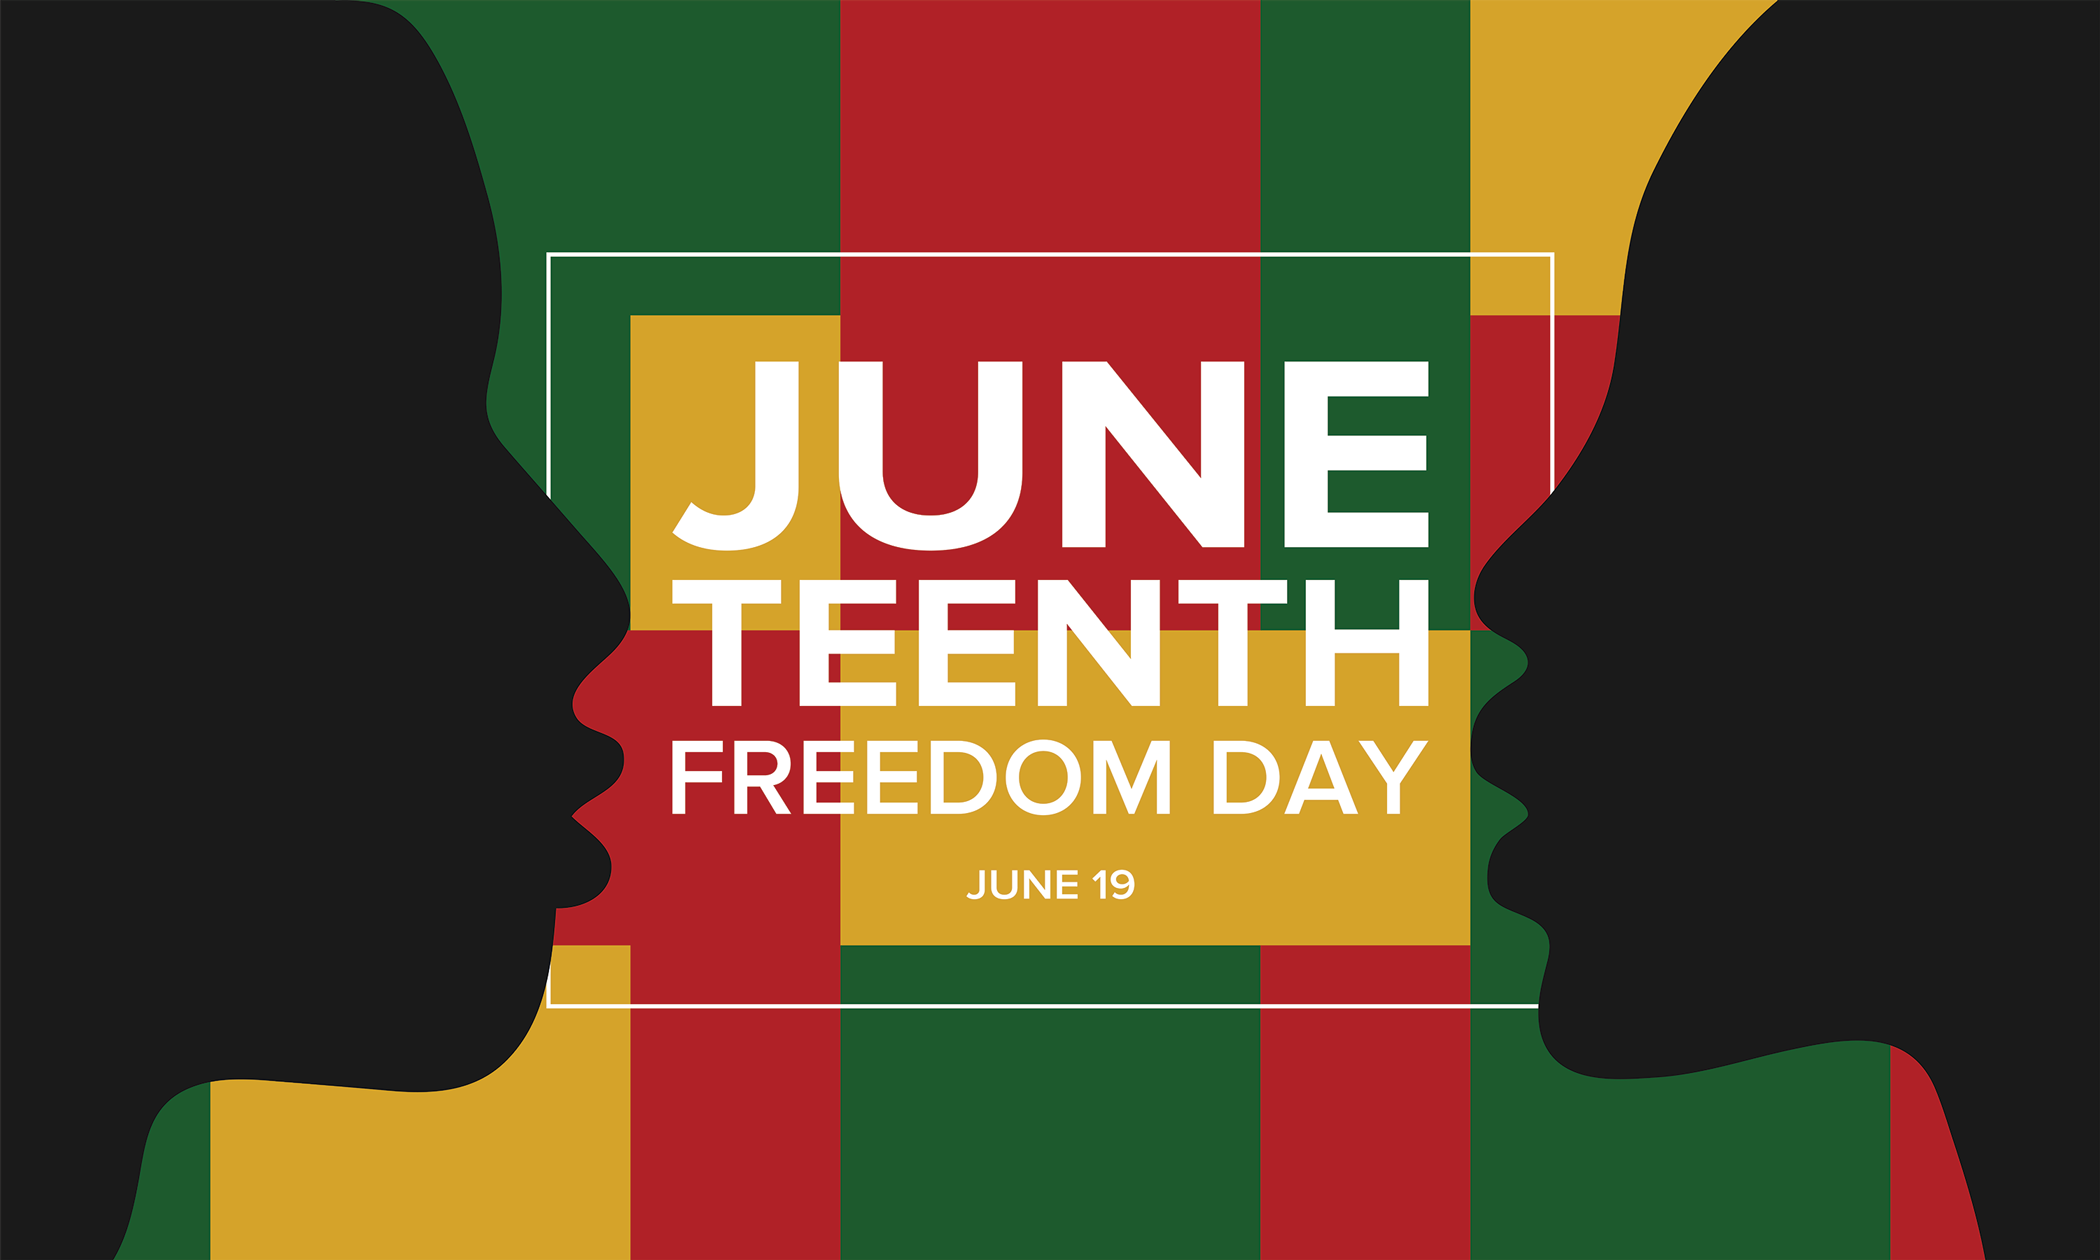 Juneteenth Freedom Day June 19